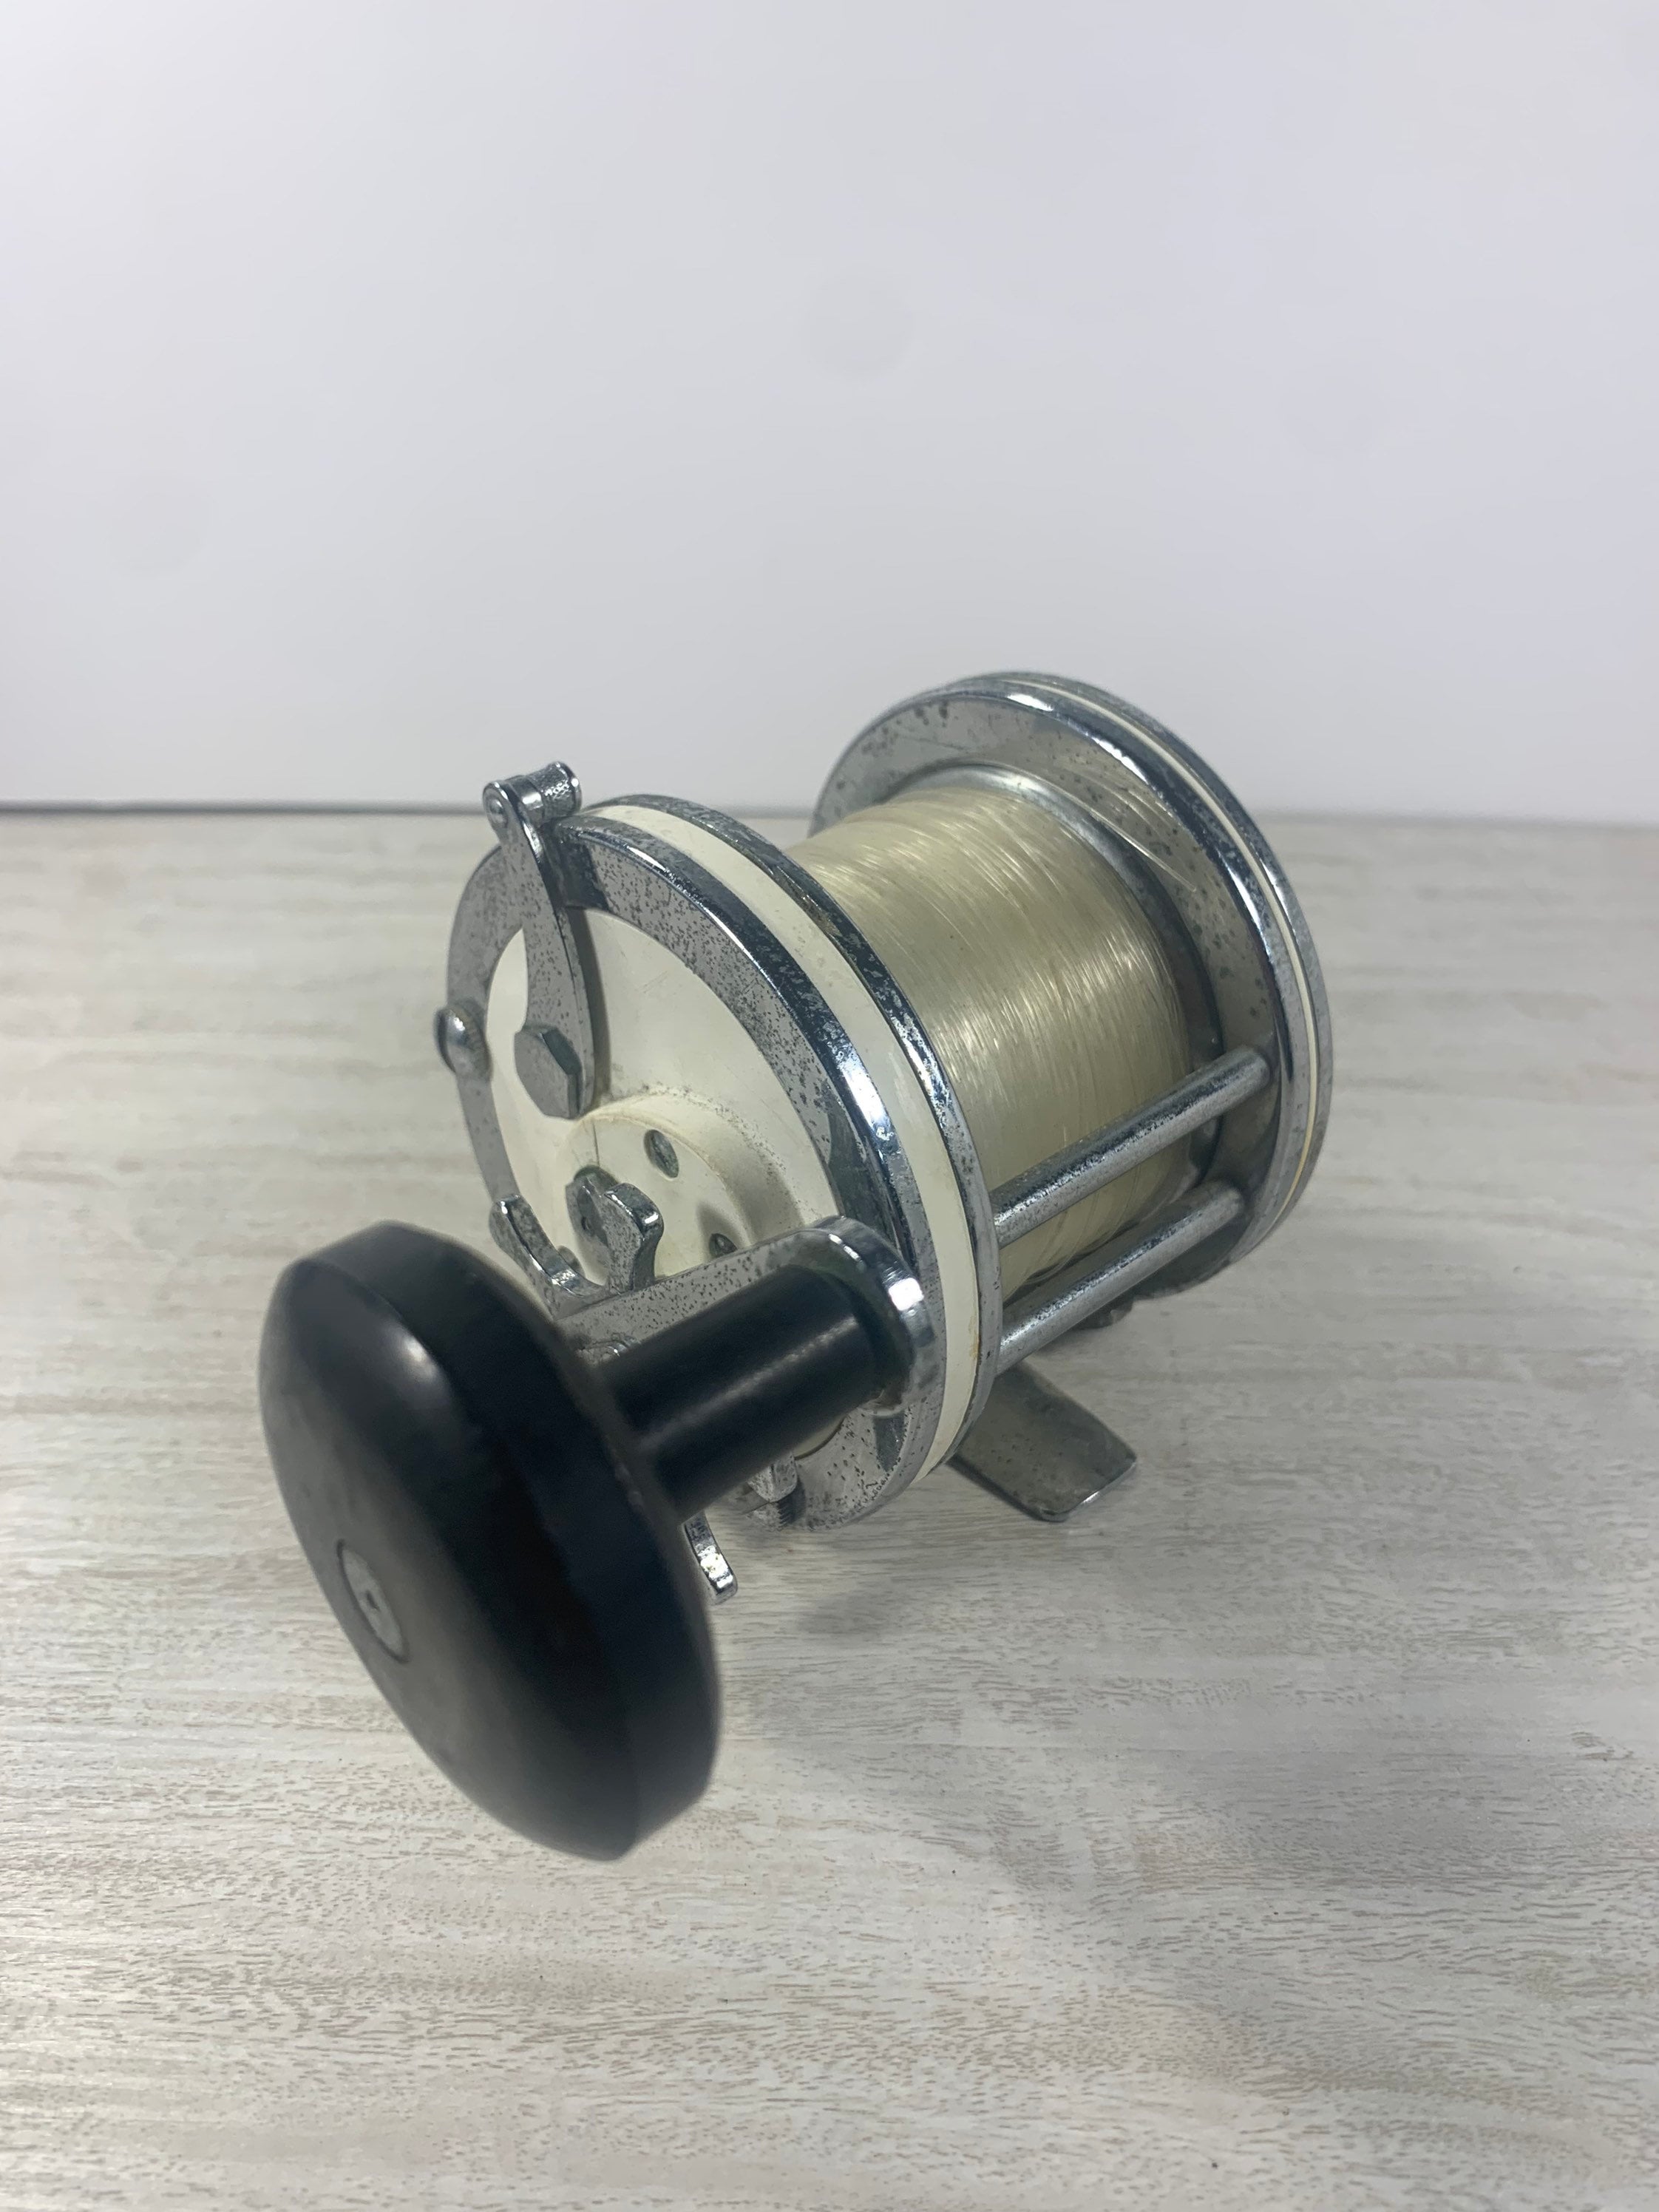 Vintage French Mid Century Green Anodized Metallic Aluminum Fishing Reel  With 2 Winding Handles, Retro 1960s Fishing Accessory From France 